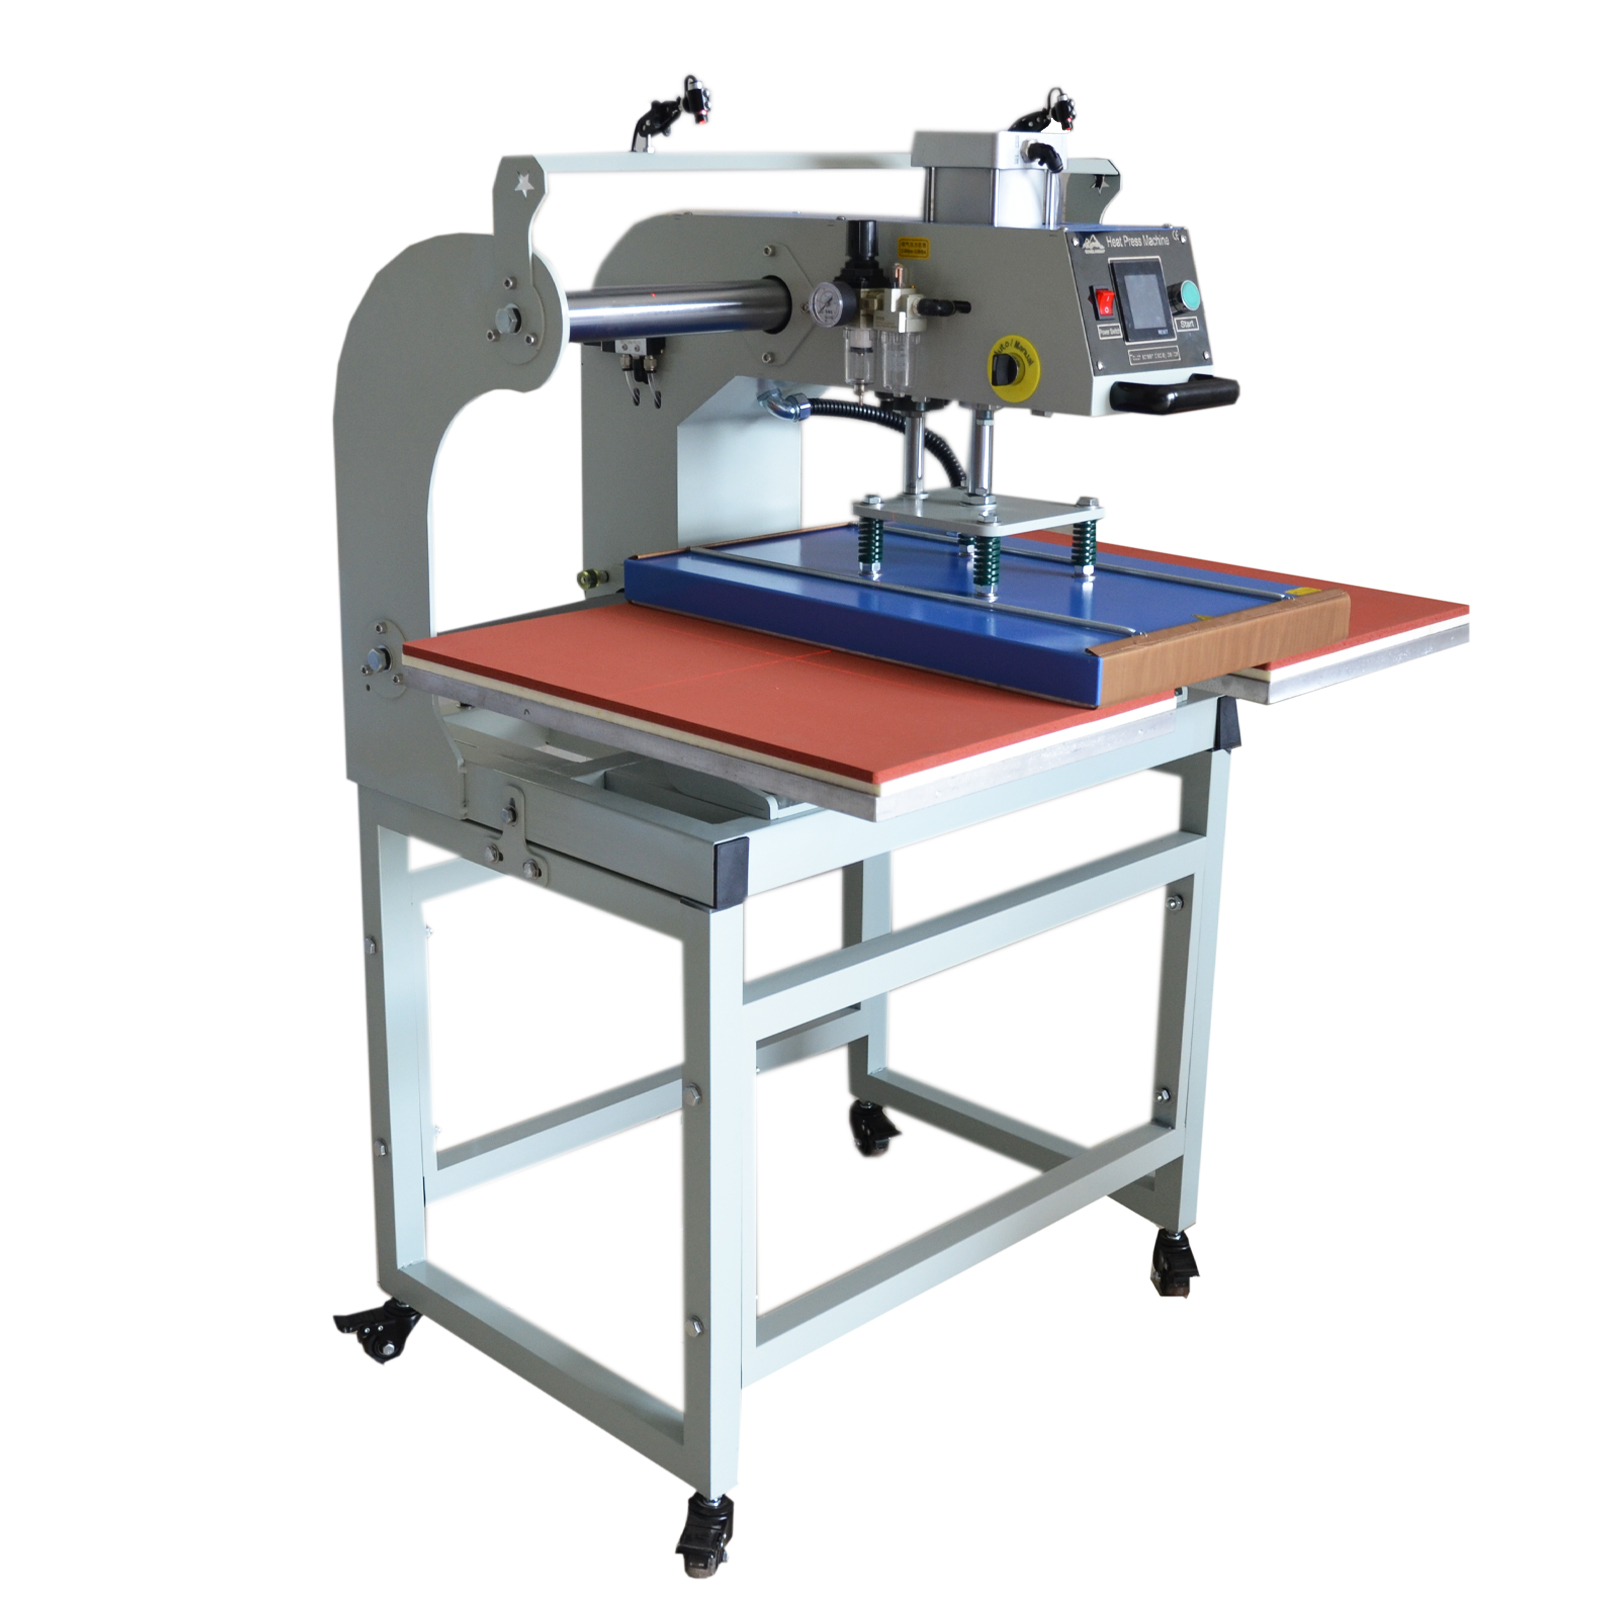 Qomolangma 16in x 24in Semi-Automatic Pneumatic Double Station Heat Press with Laser Positioning System